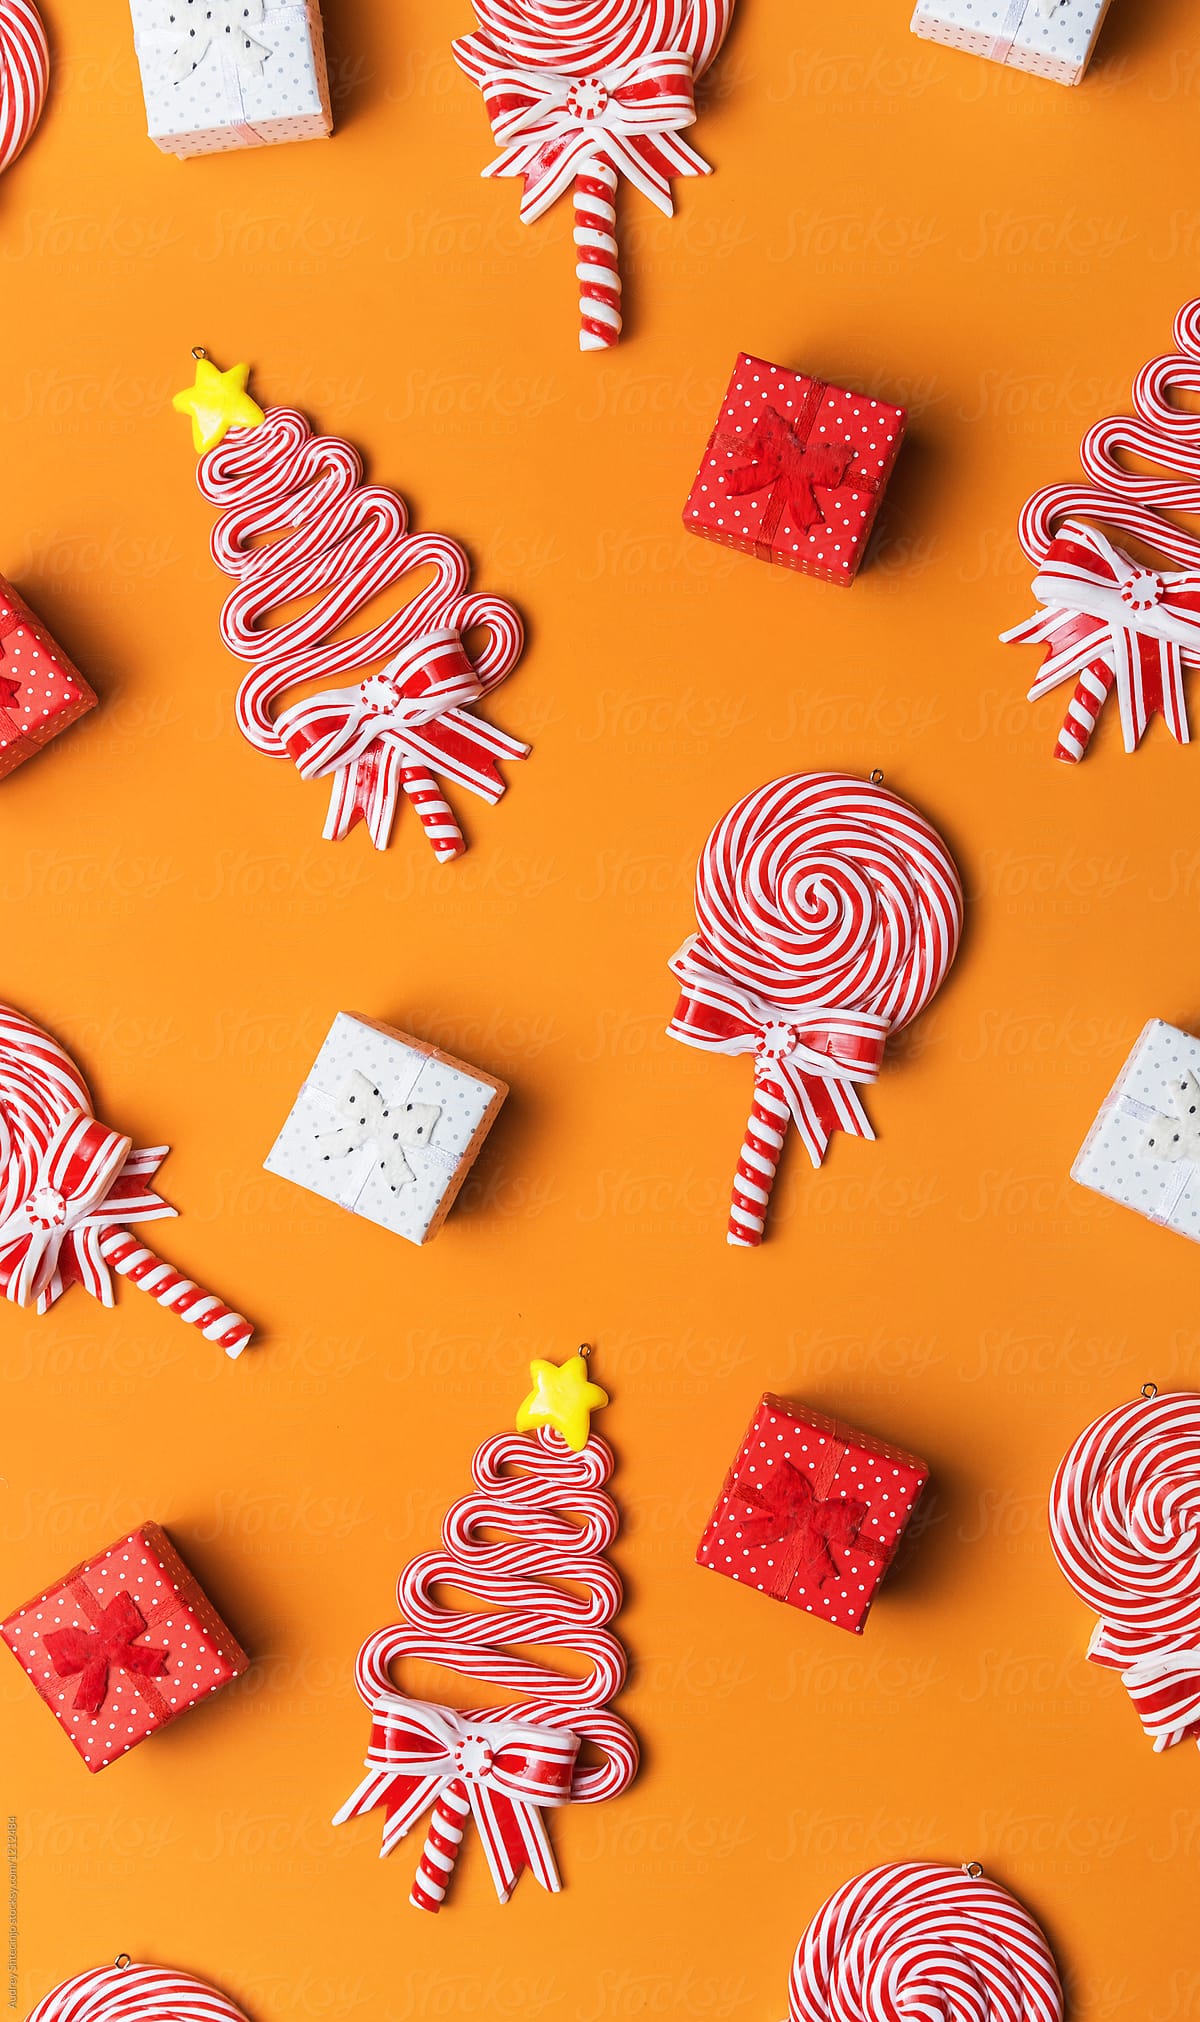 Various/Lollipop sweets decorations and small presents on orange background